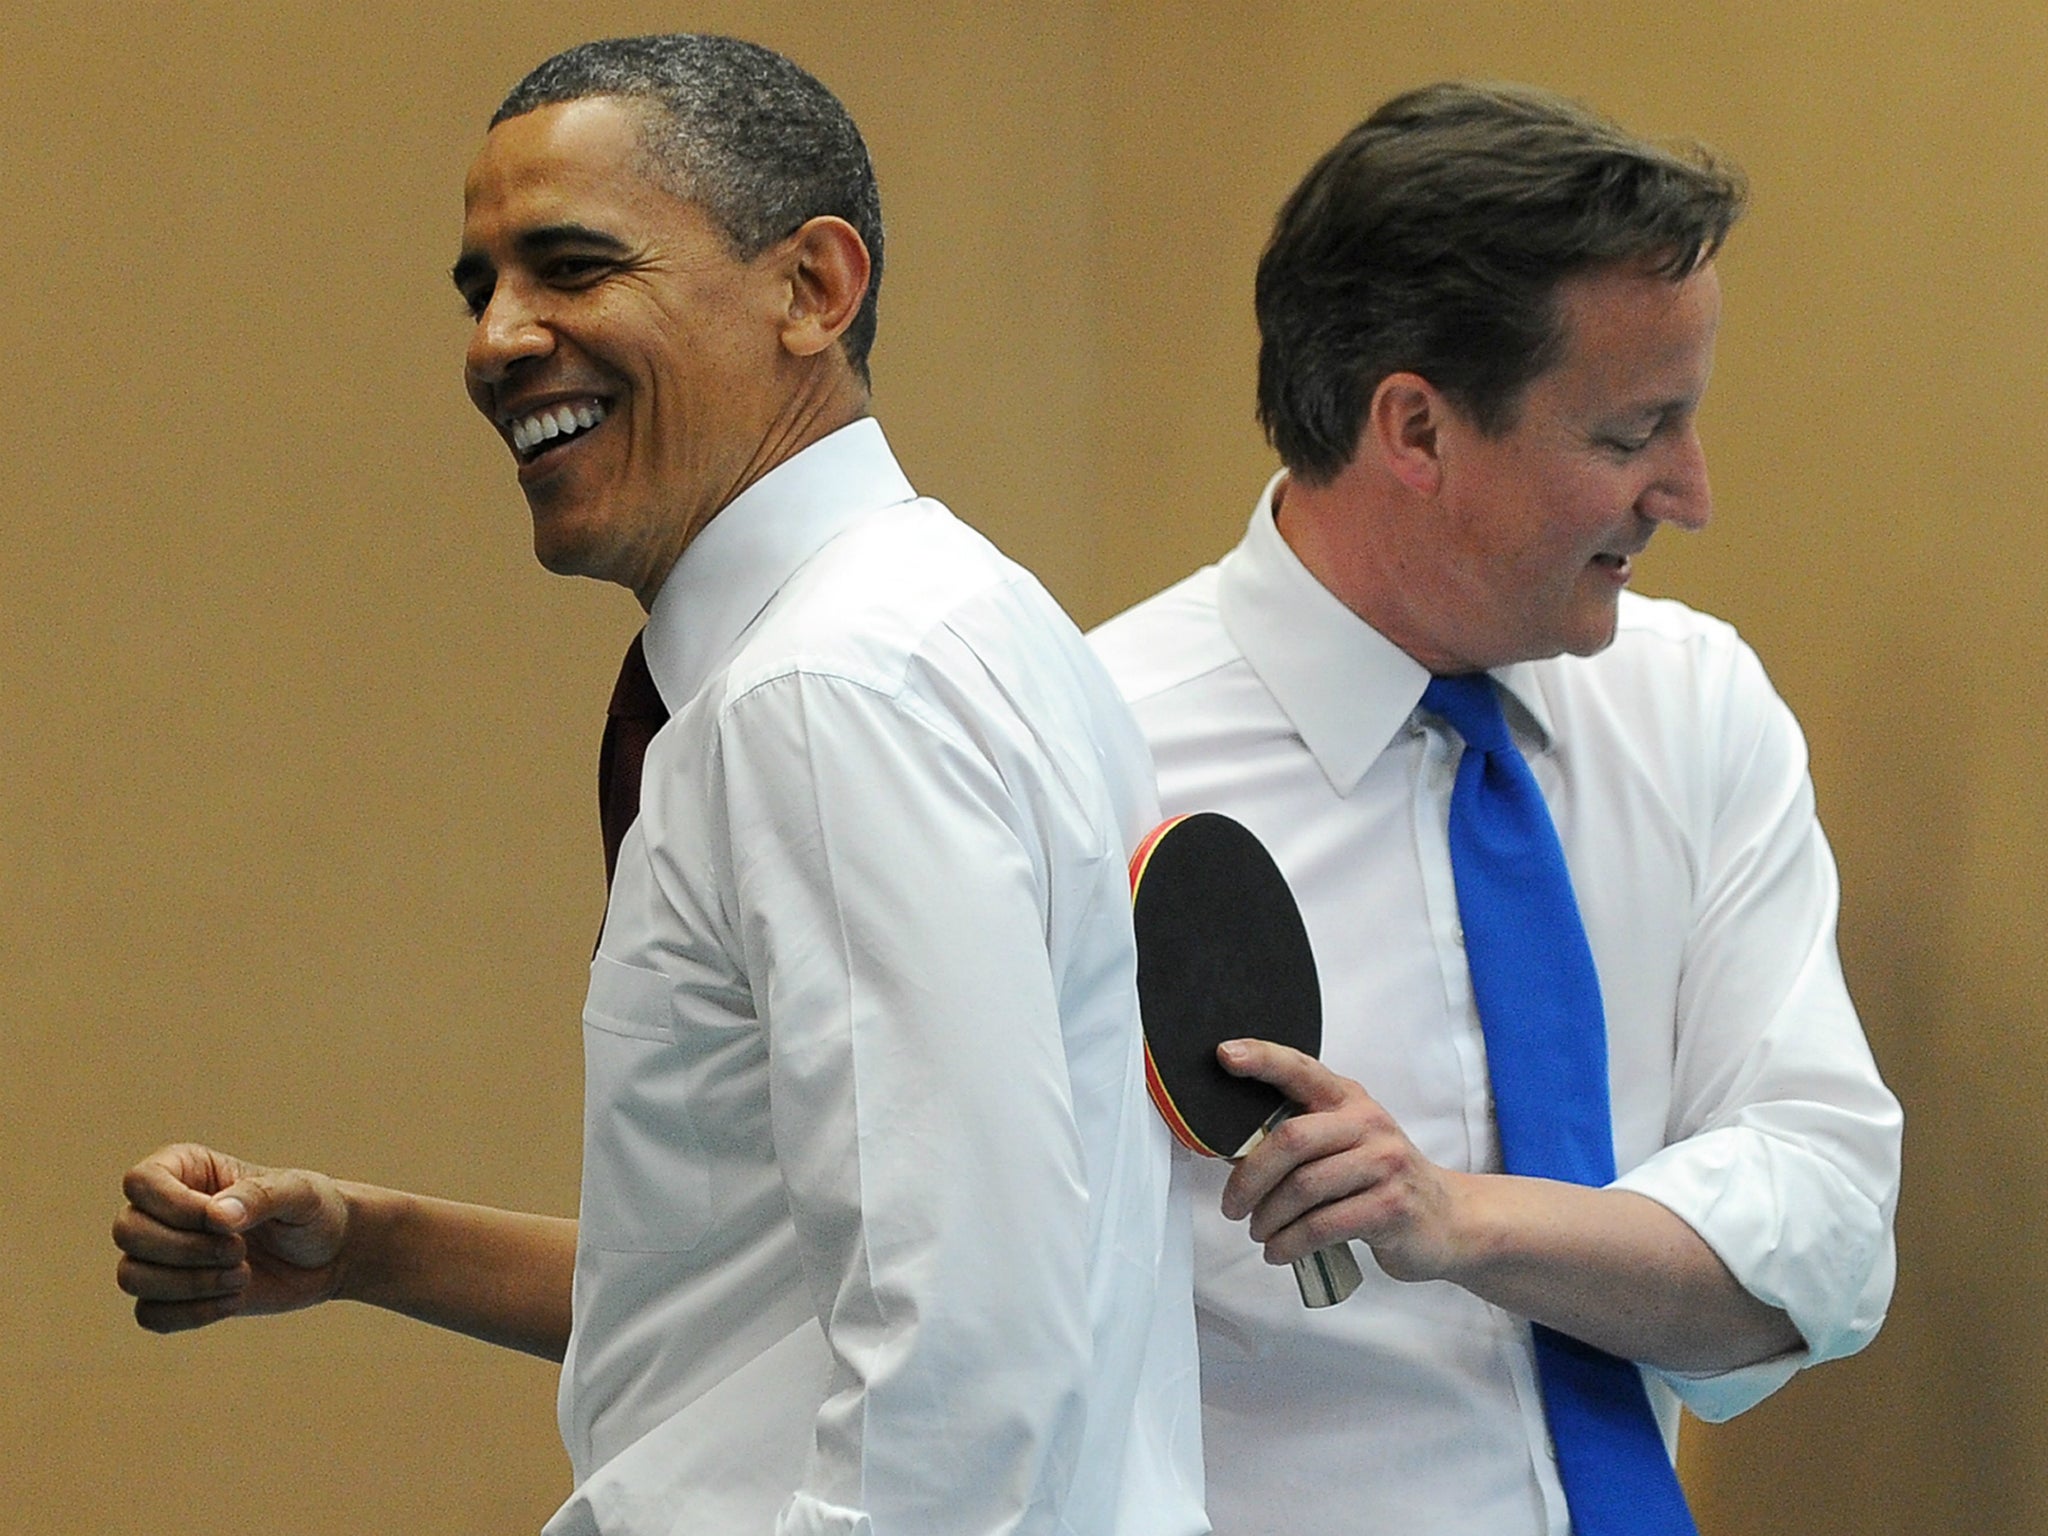 Cameron and Obama play table tennis in London's Globe Academy school